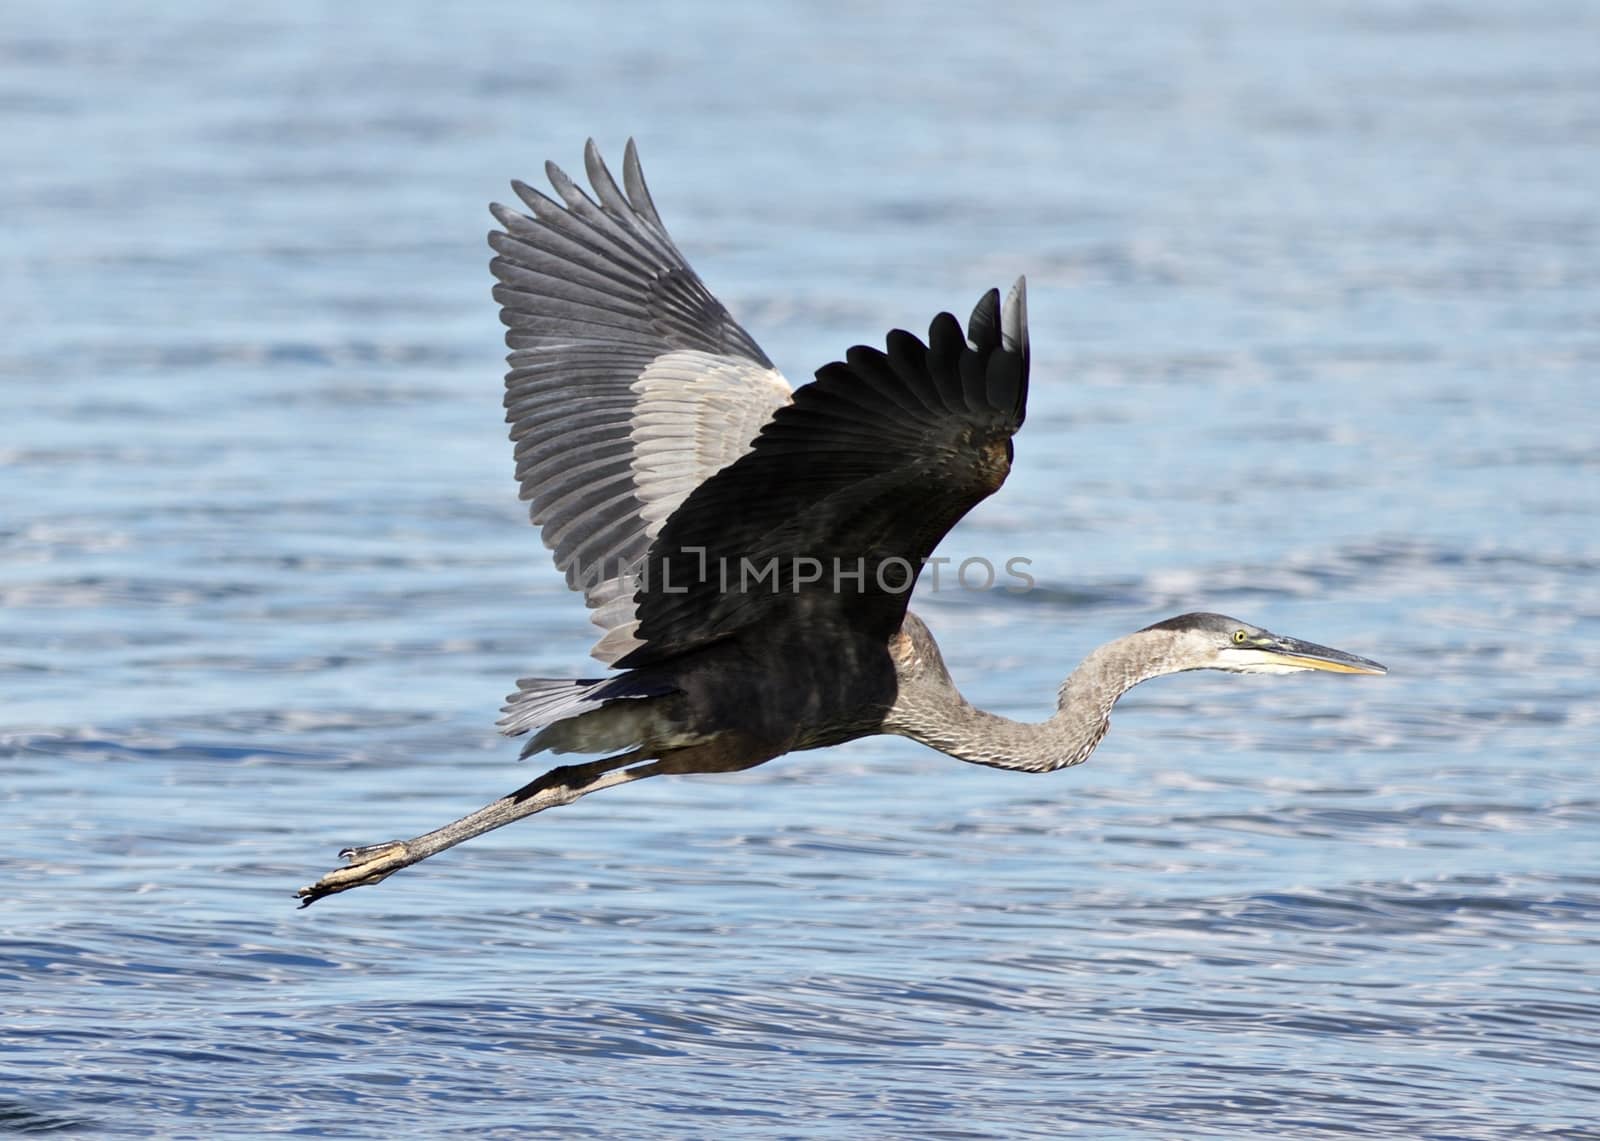 Beautiful isolated image with a funny great heron flying near the water by teo